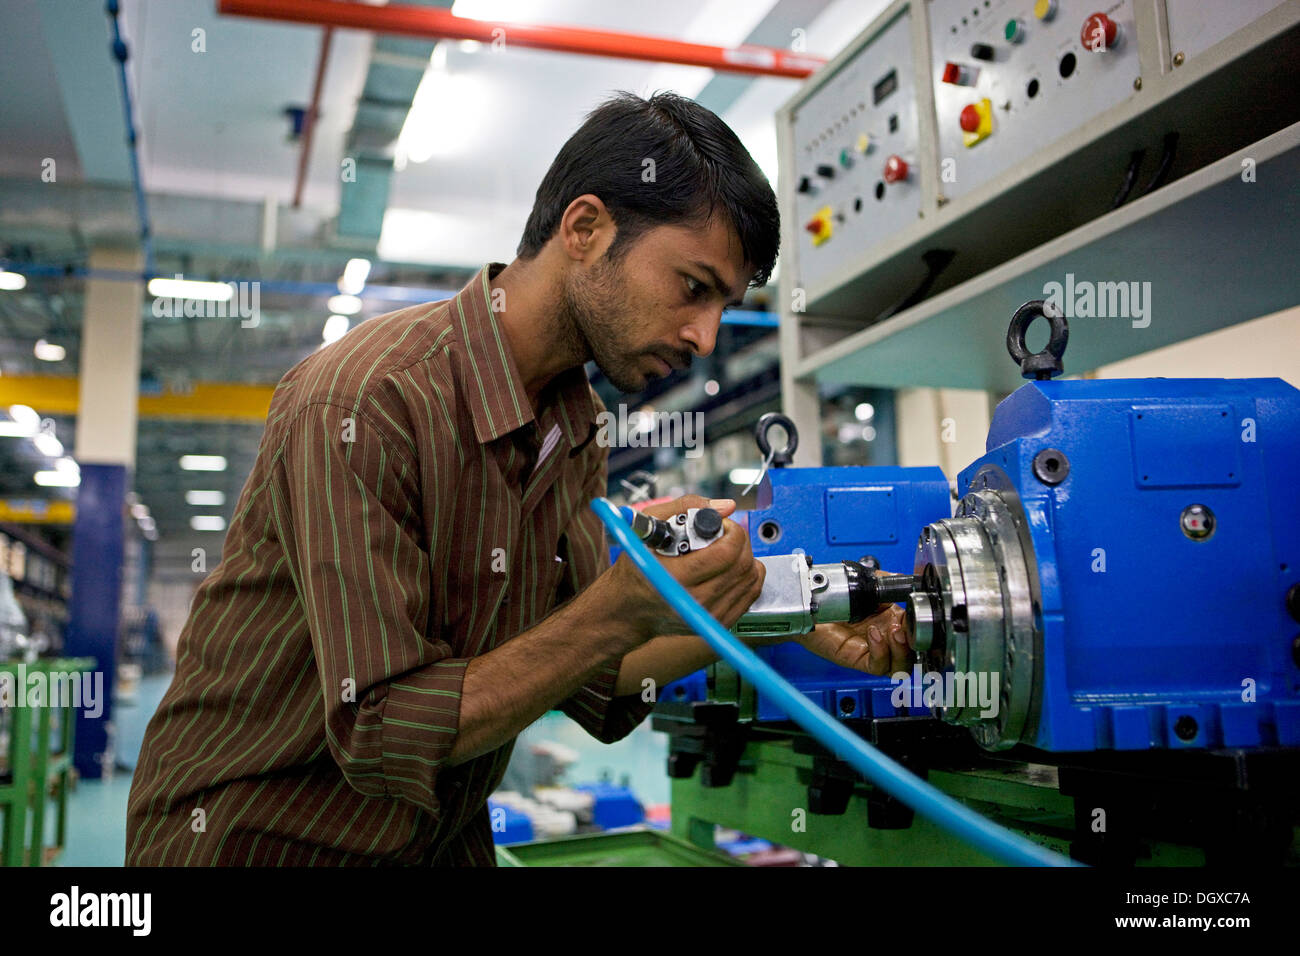 Worker on the shop floor of a supplier for the German engineering company Mao Deckel, Bangalore, Karnataka, India Stock Photo